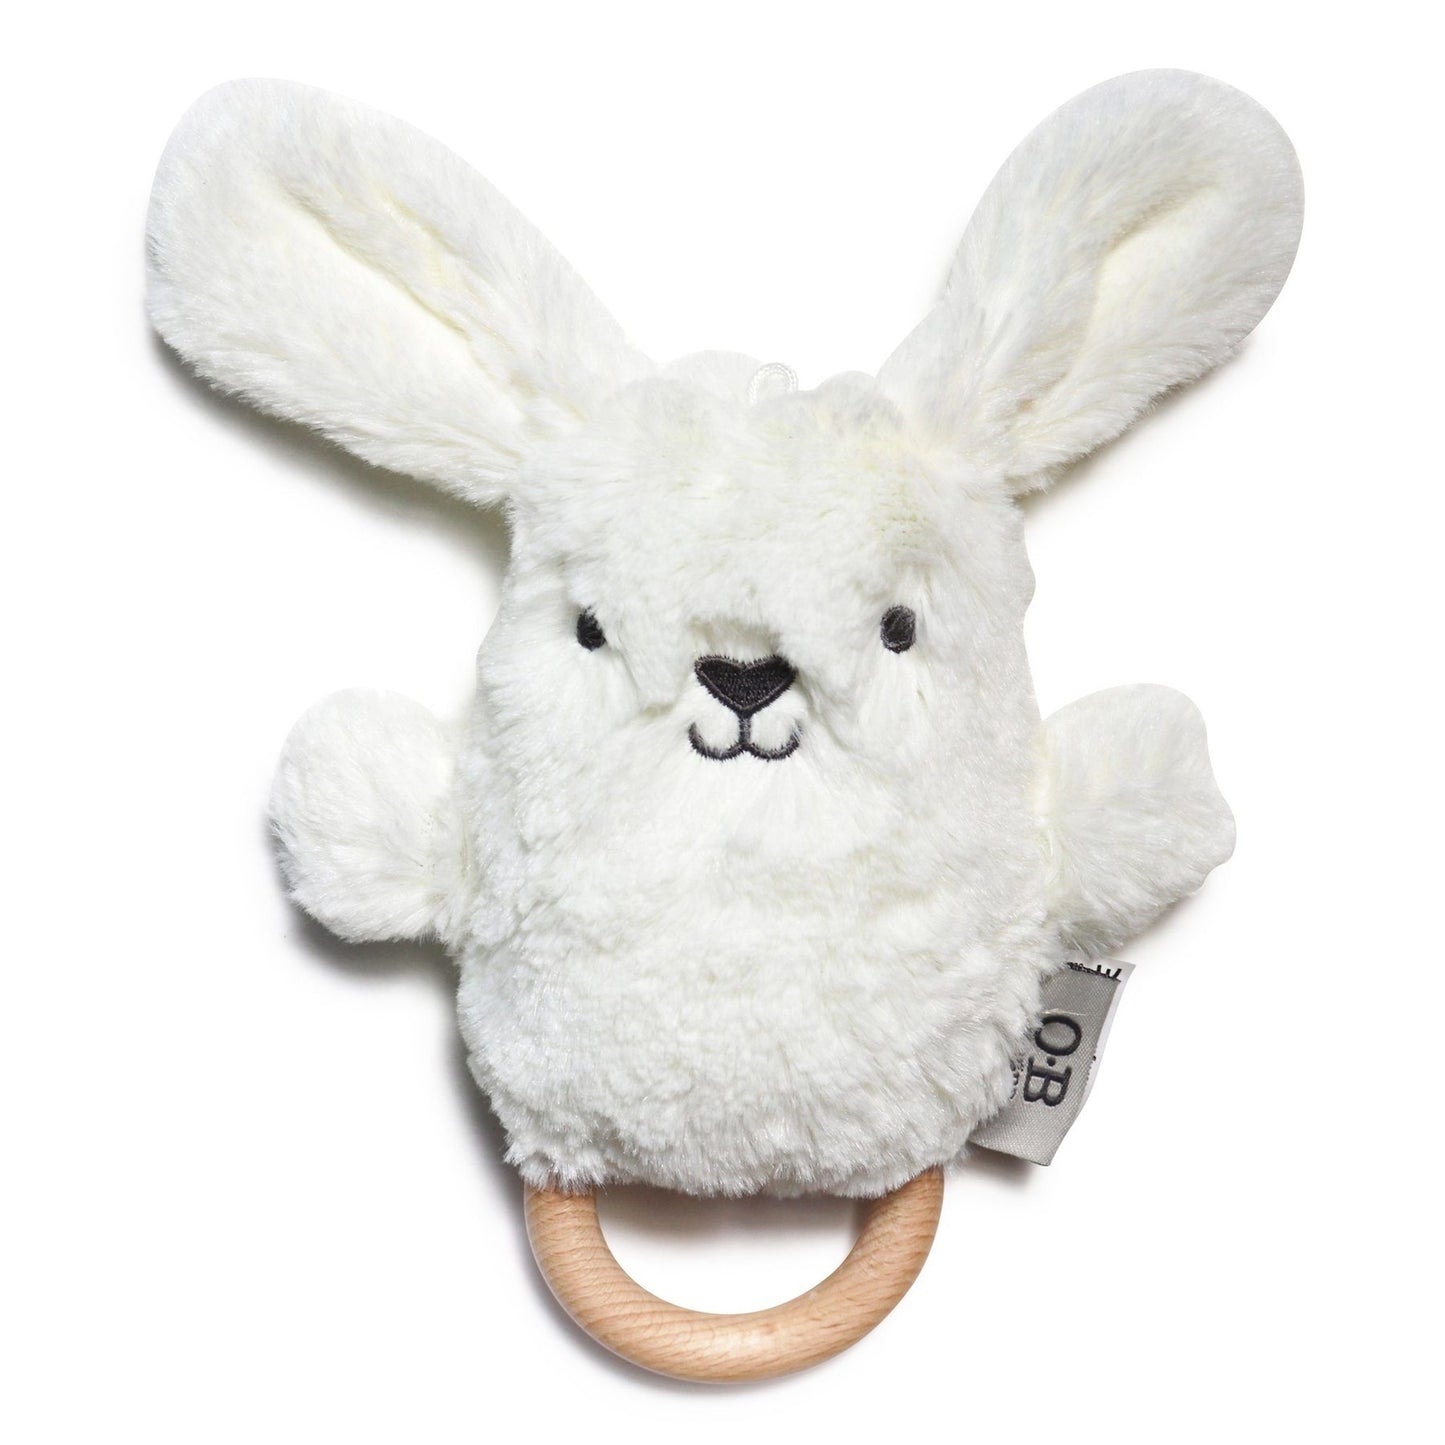 OB Designs Bunnies Soft Rattle Toy - Assorted